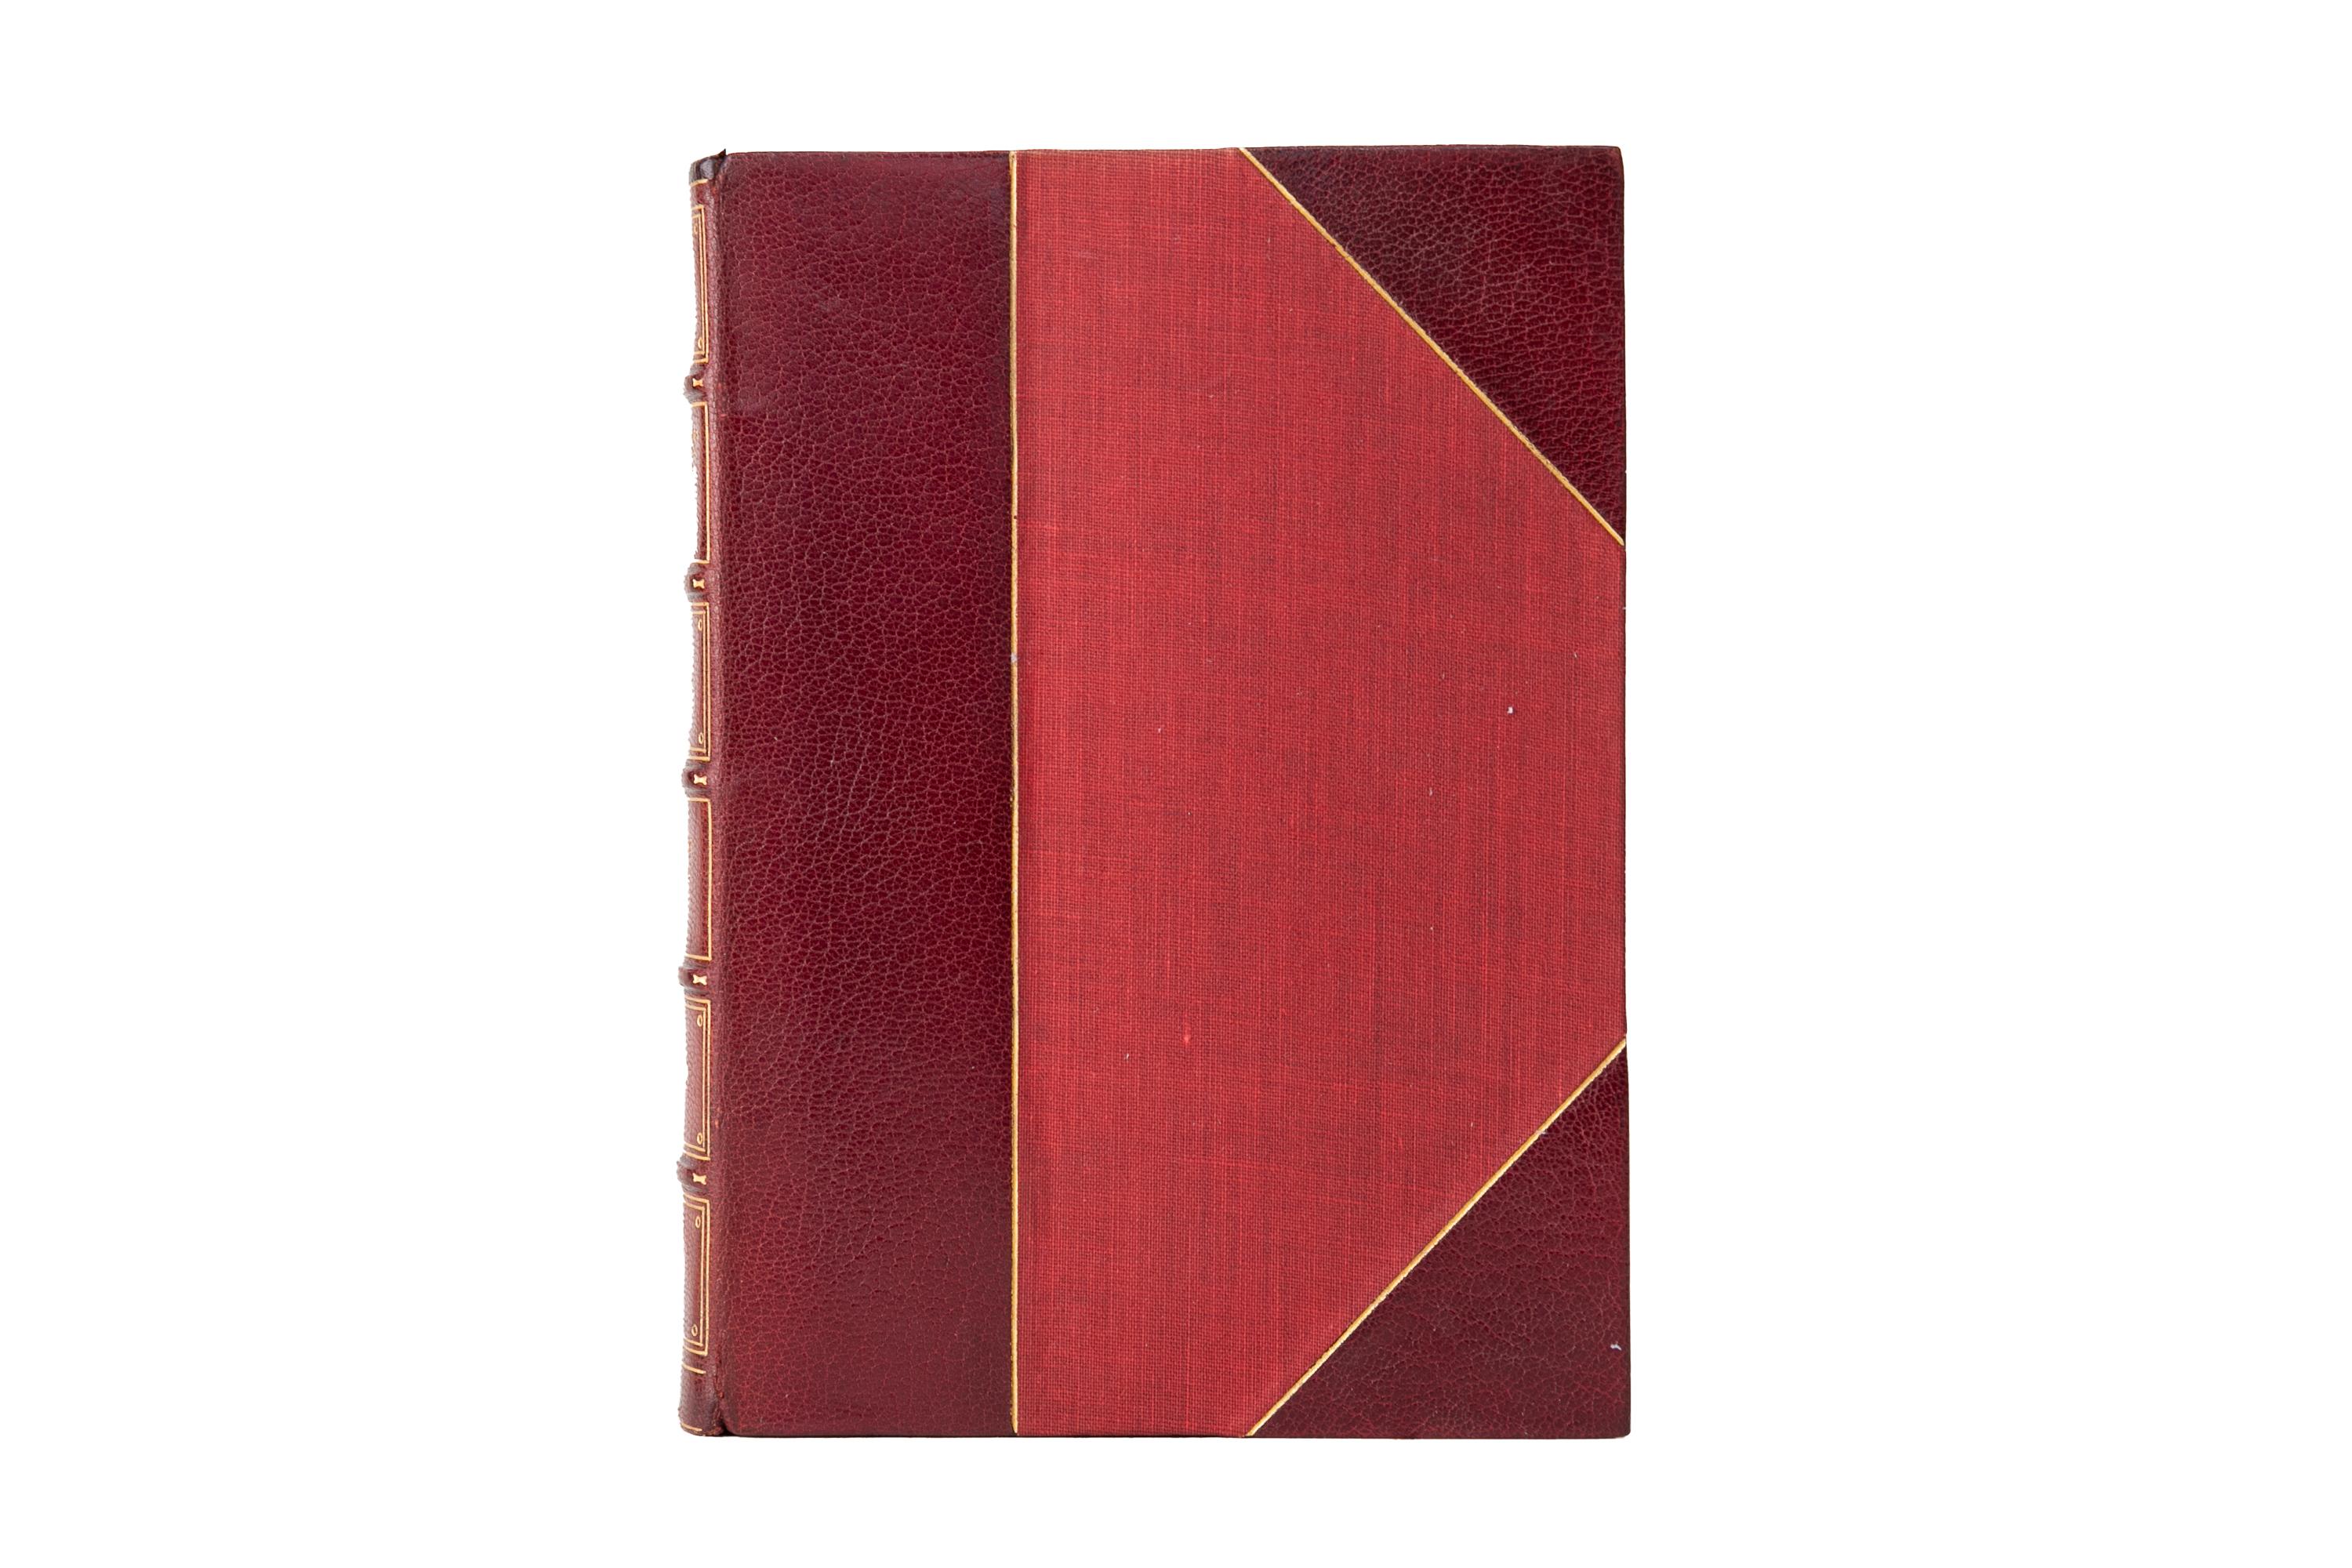 38 Volumes. Charles Dickens, The Works. Gadshill Edition. Bound by Bayntun in 3/4 red morocco and linen boards bordered in gilt-tooling. Raised band spines with gilt-tooled detailing. Top edges gilt with marbled endpapers. Introductions, general